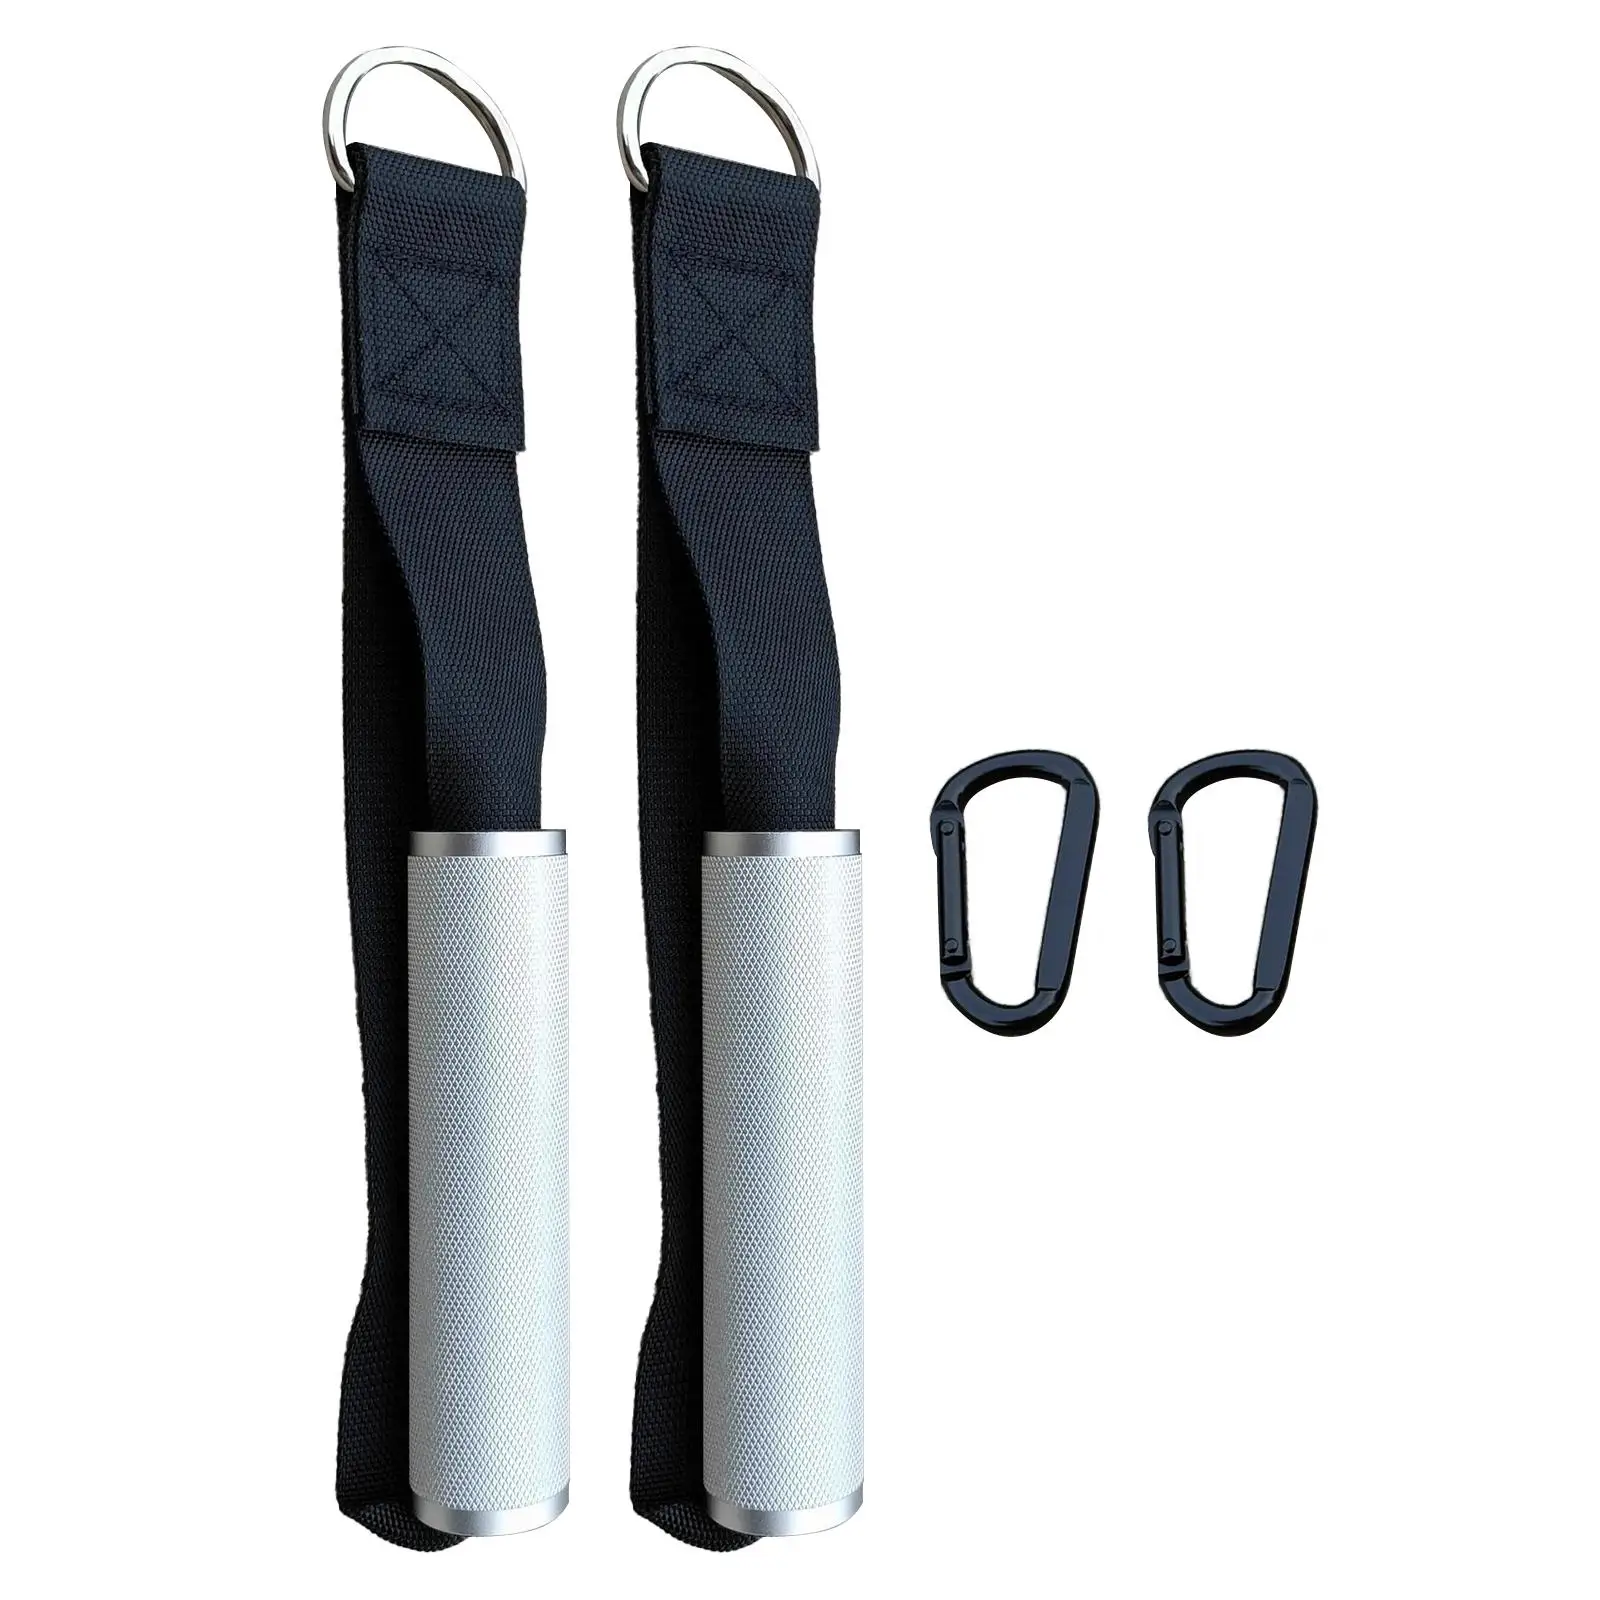 2x Gym Handles Chest Fitness Accs Resistance Exercise Gymnastics Hanging Exercise Device Metal for Strength Trainer Yoga Pilates